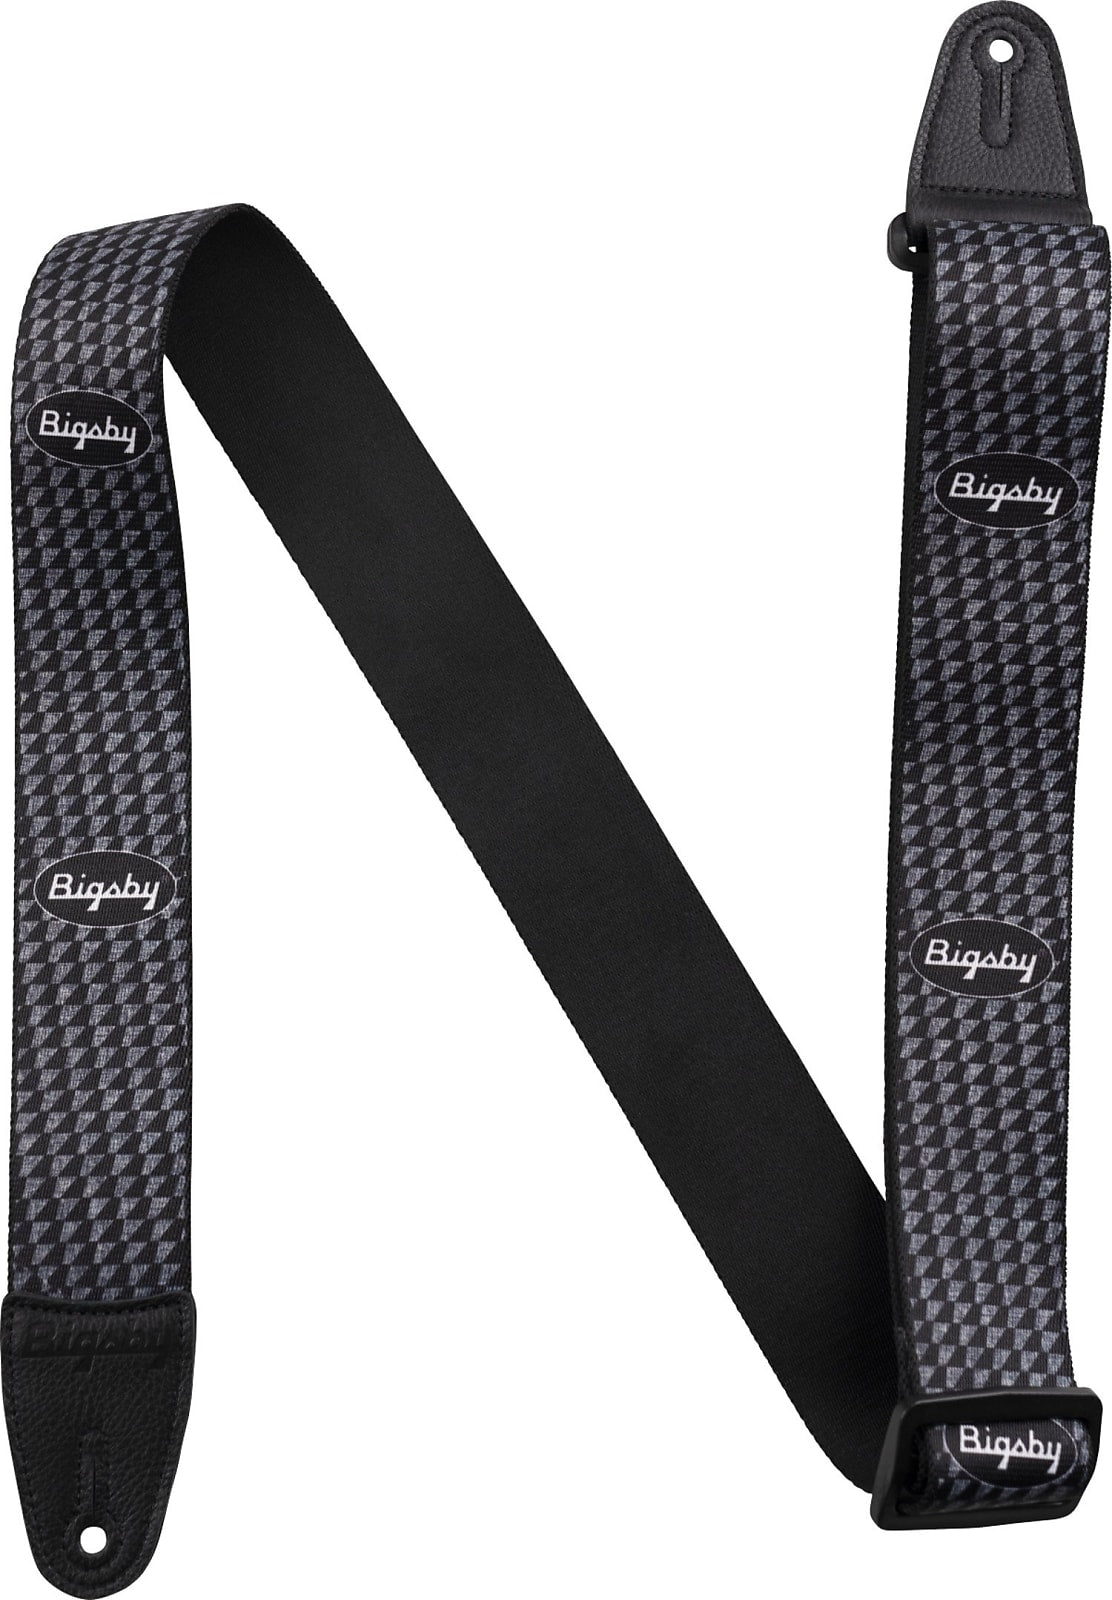 Bigsby Hounds Tooth Strap, Black, 2"